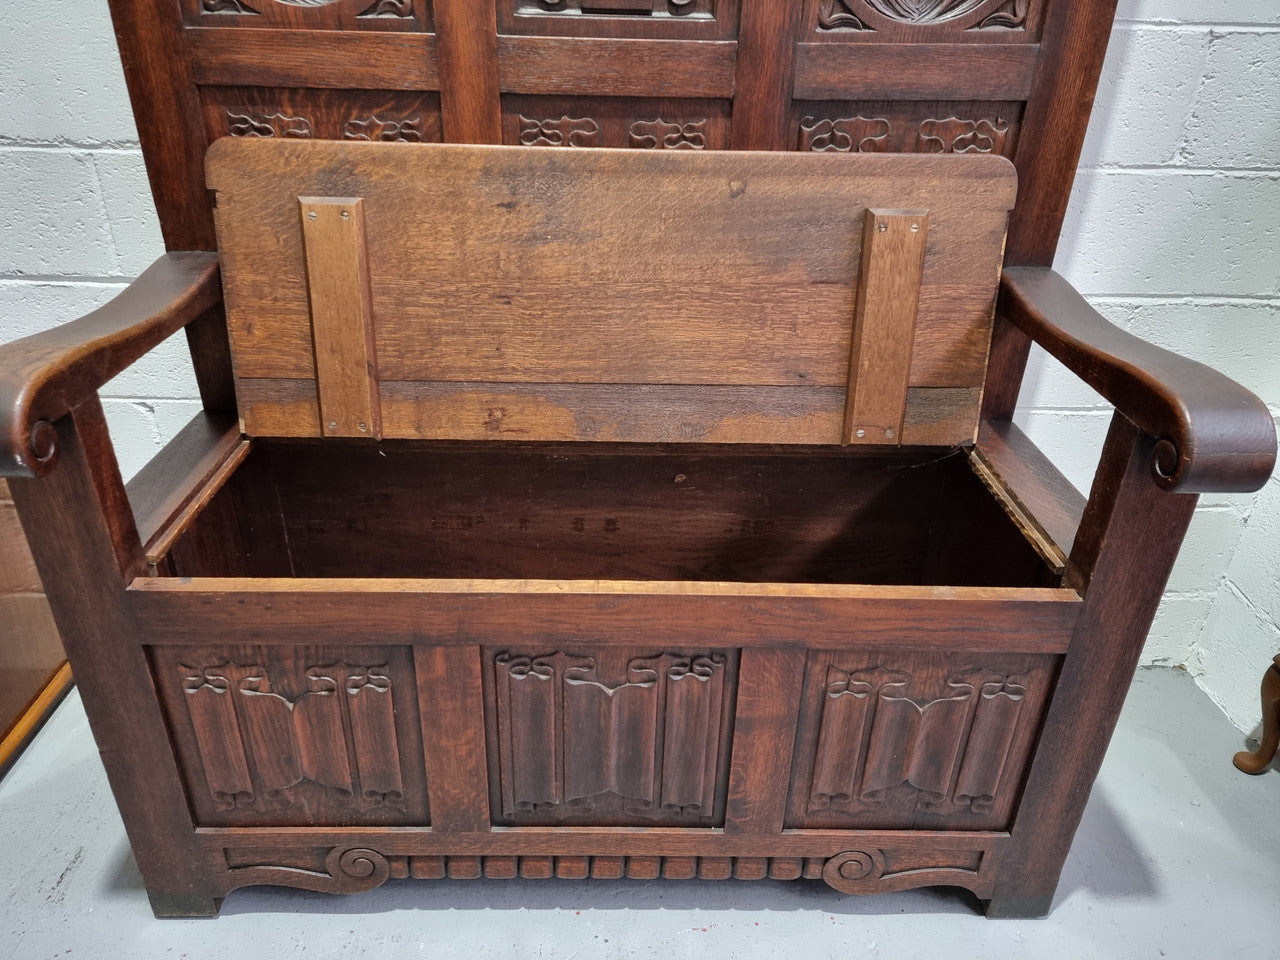 Decorative and nicely carved French Oak 19th Century hall seat with lift up lid for storage. Beautiful details and in good original detailed condition.